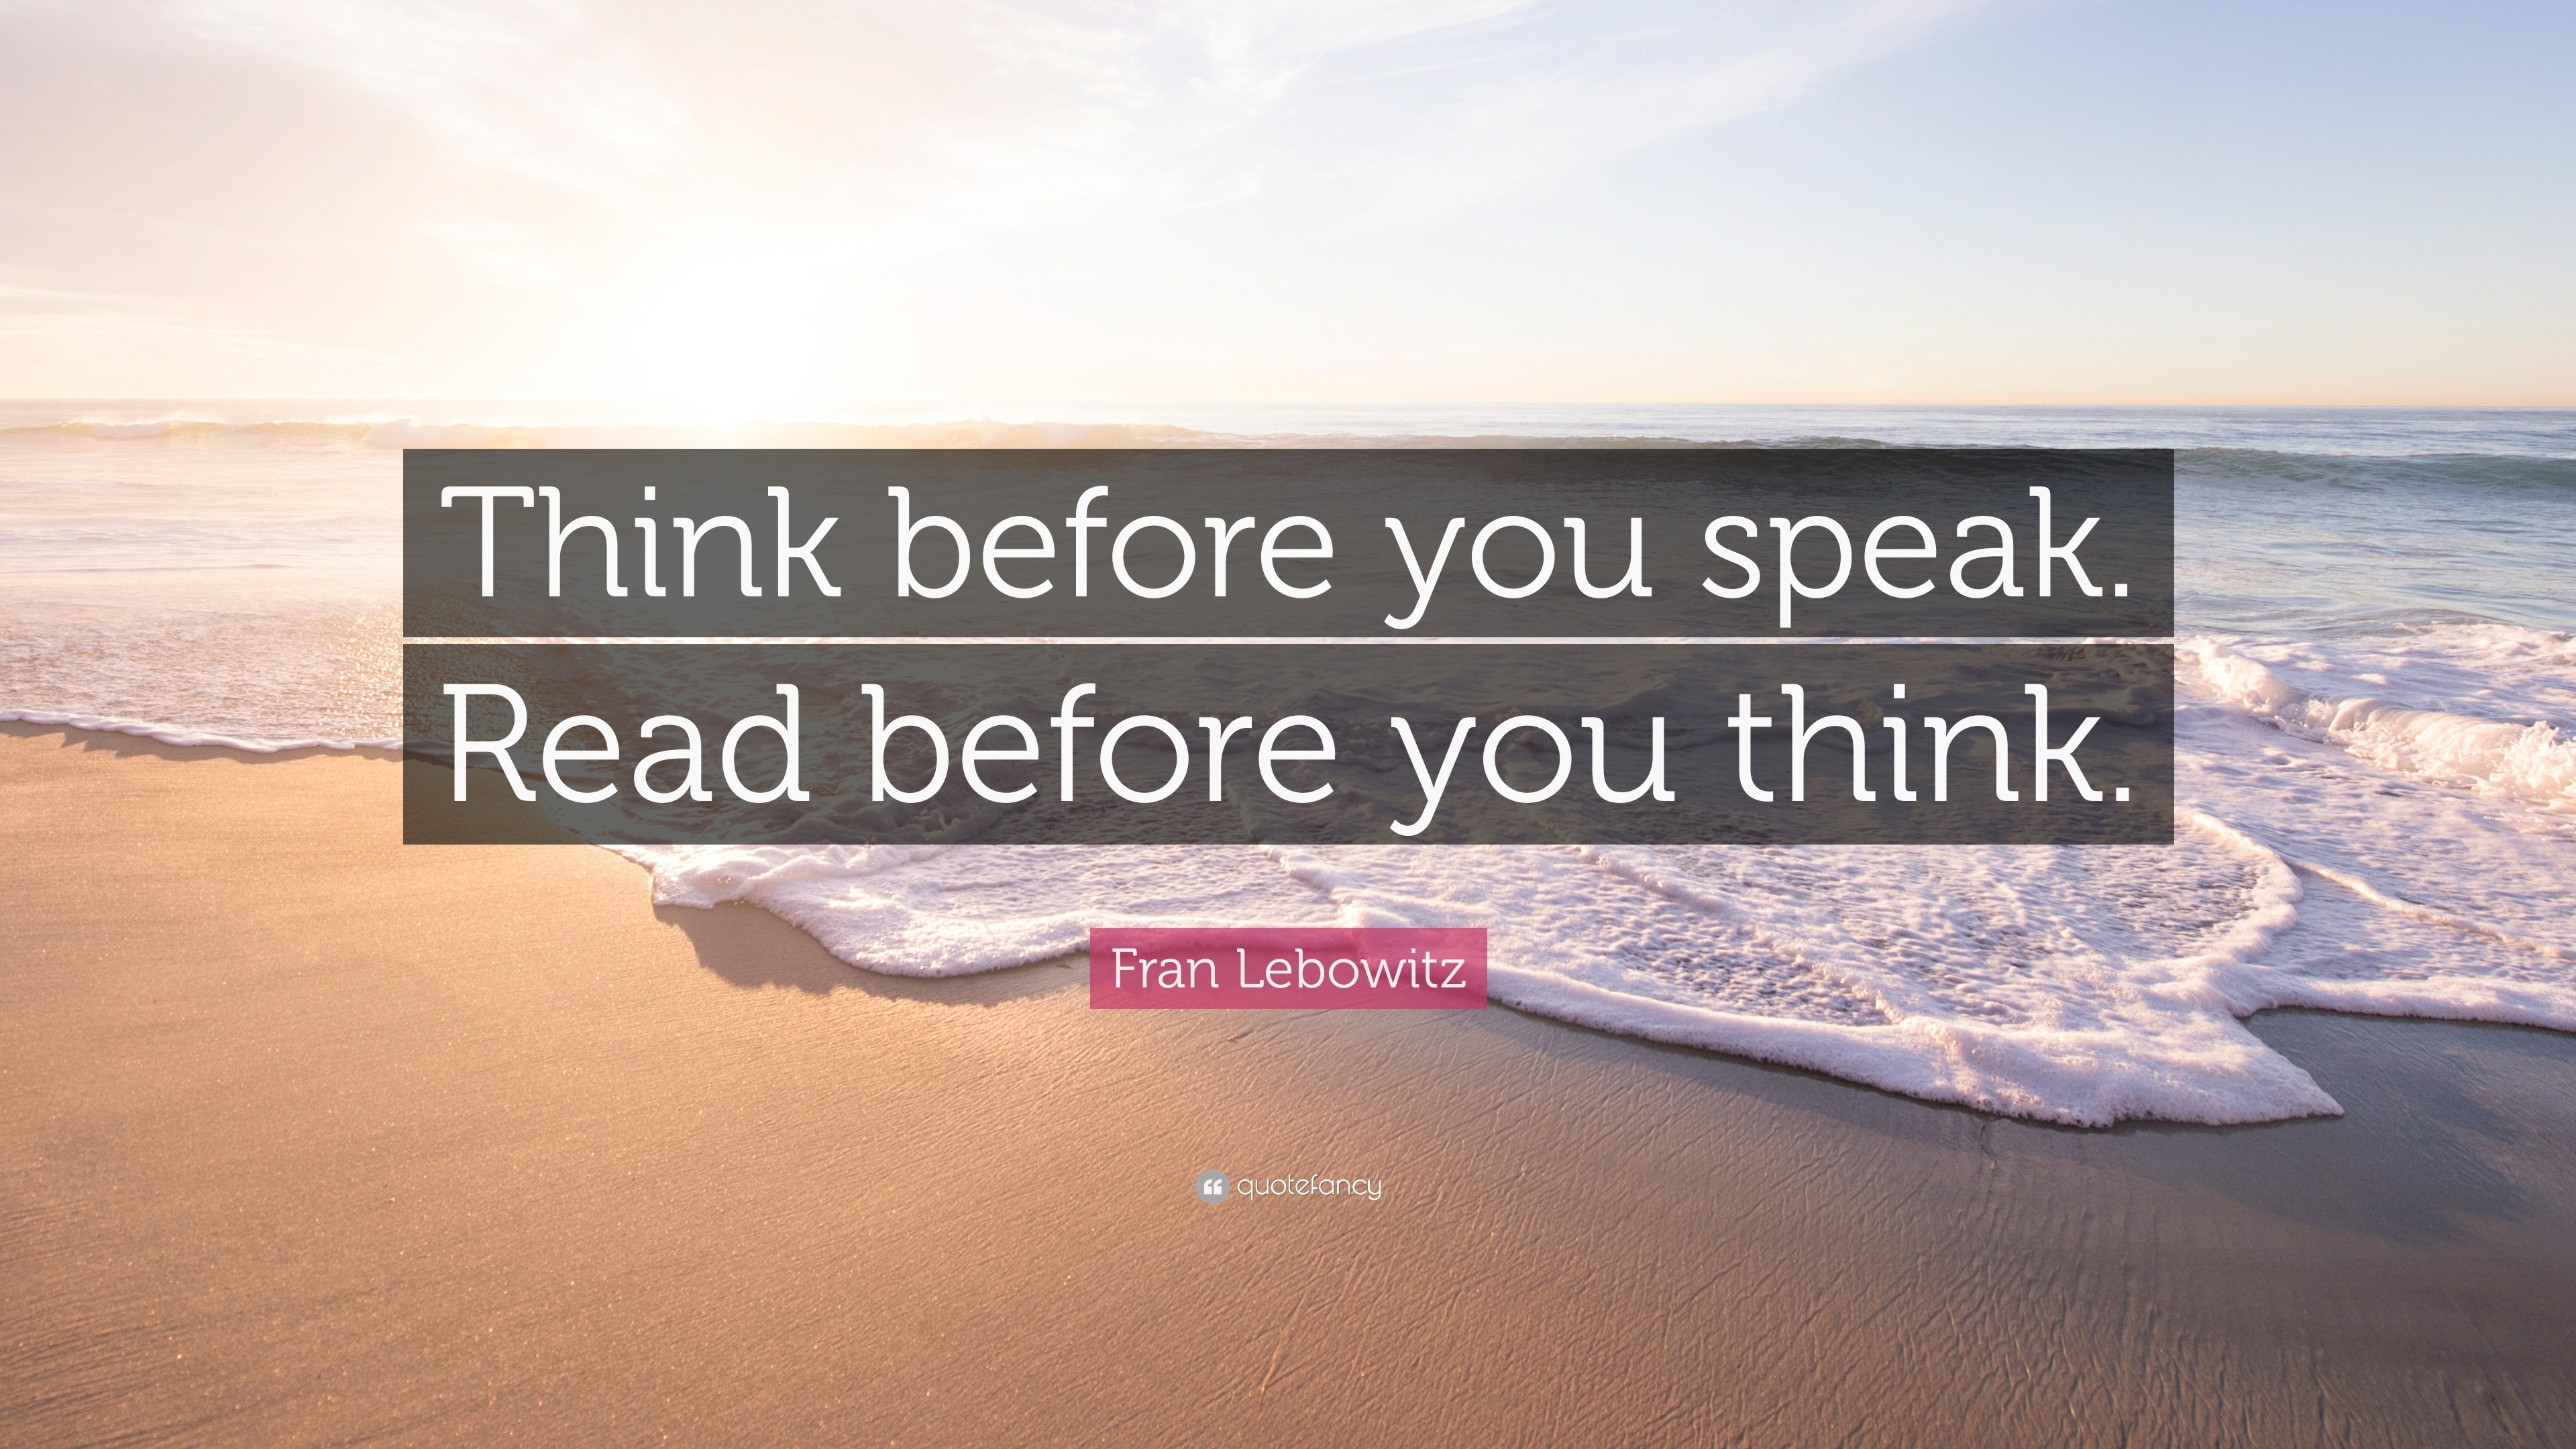 Fran Lebowitz Quote: “Think before you speak. Read before you think.”